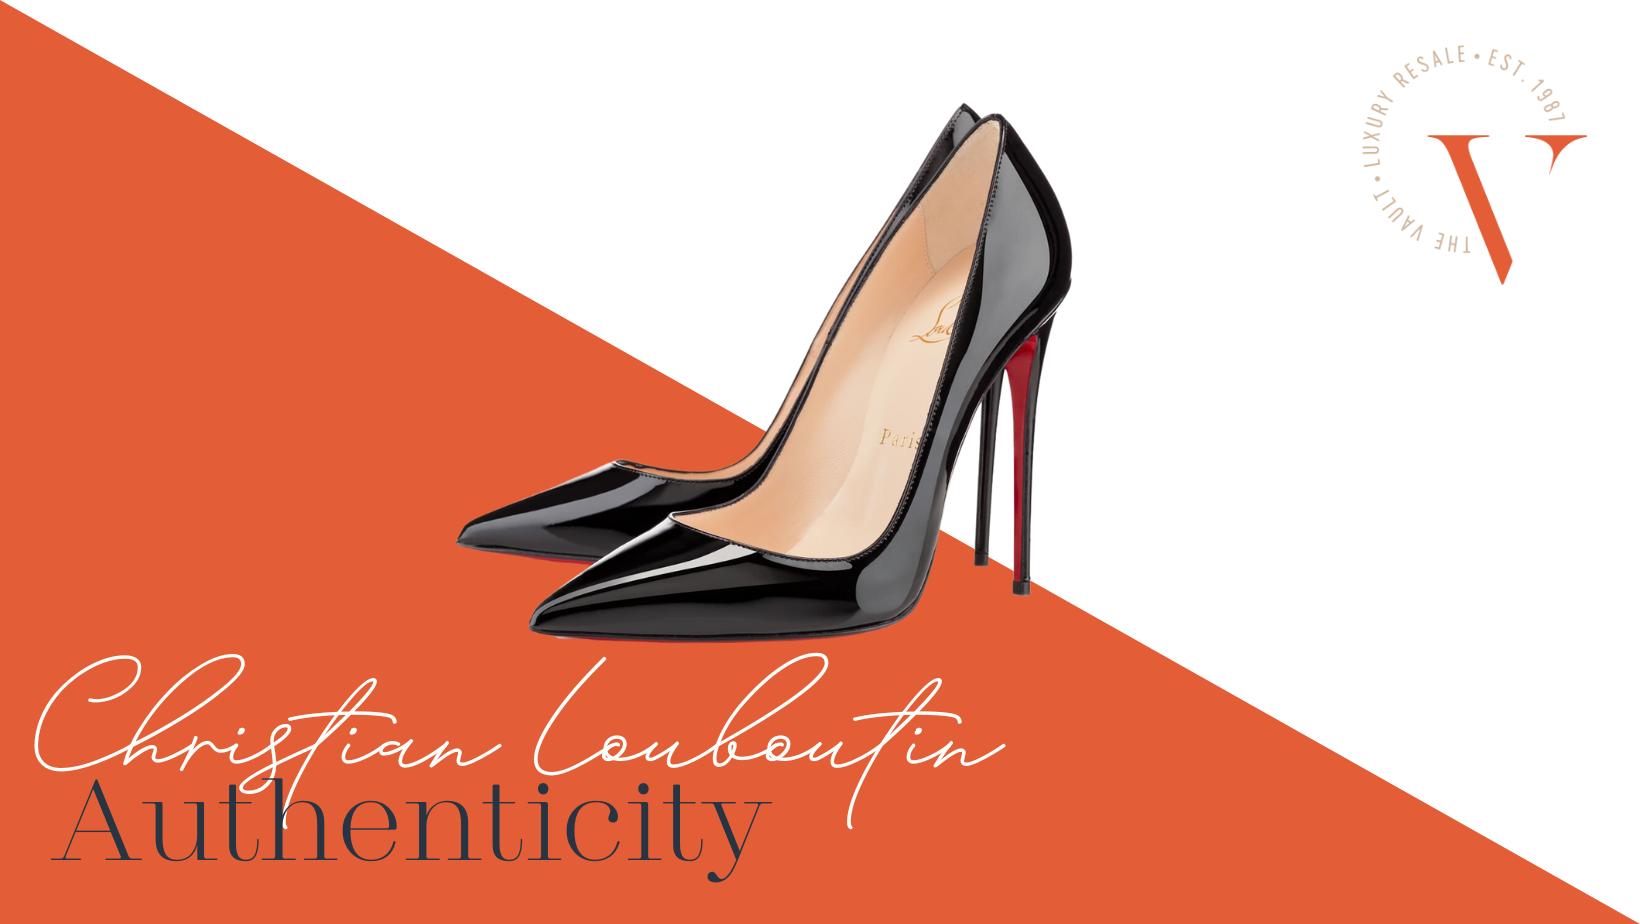 How to Authenticate Christian Louboutin: The Key Factors